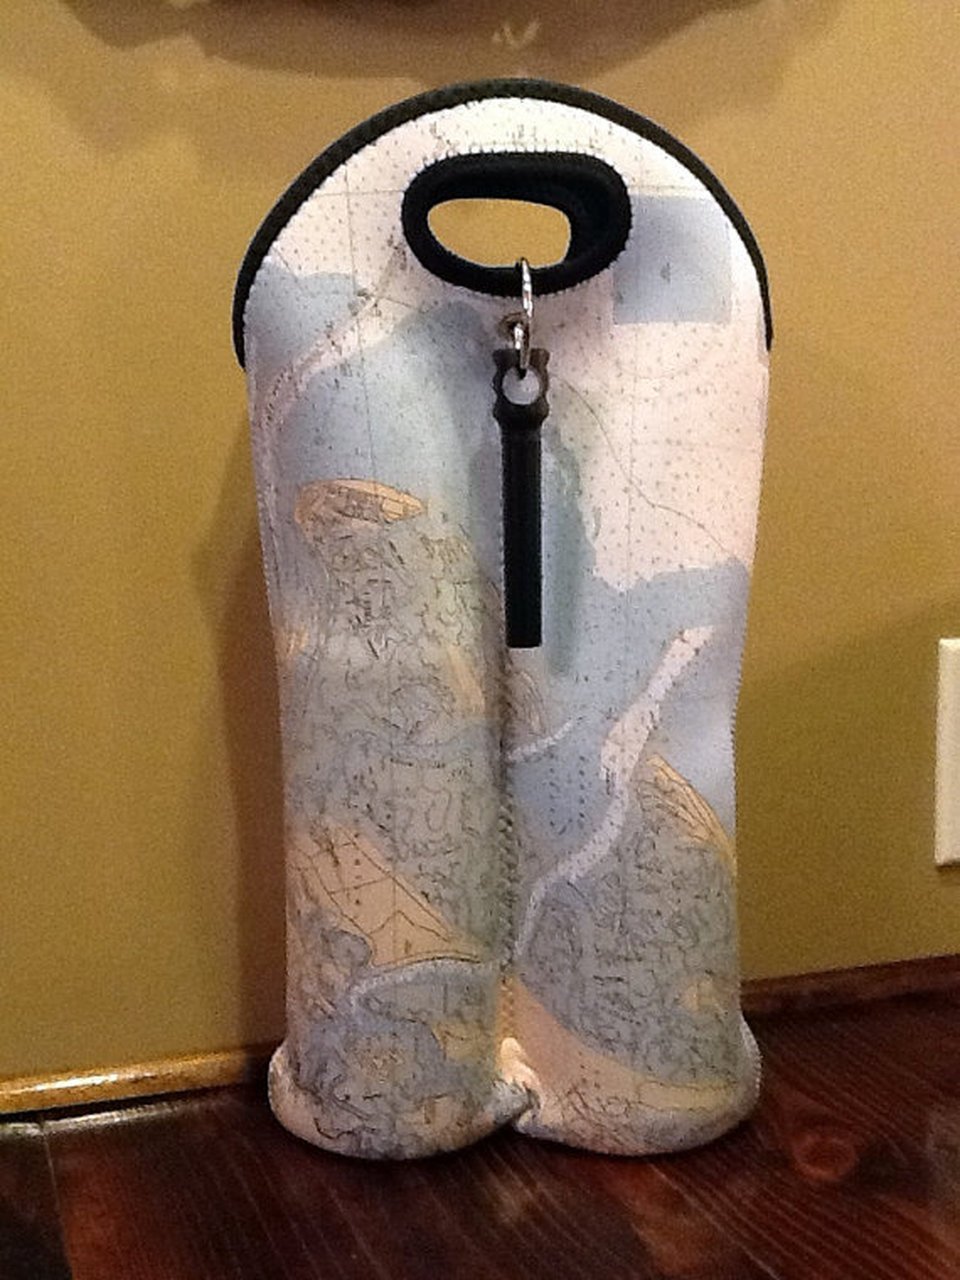 Savannah Jack's LBI Custom Chart Double Wine Bags available at The Good Life Boutique